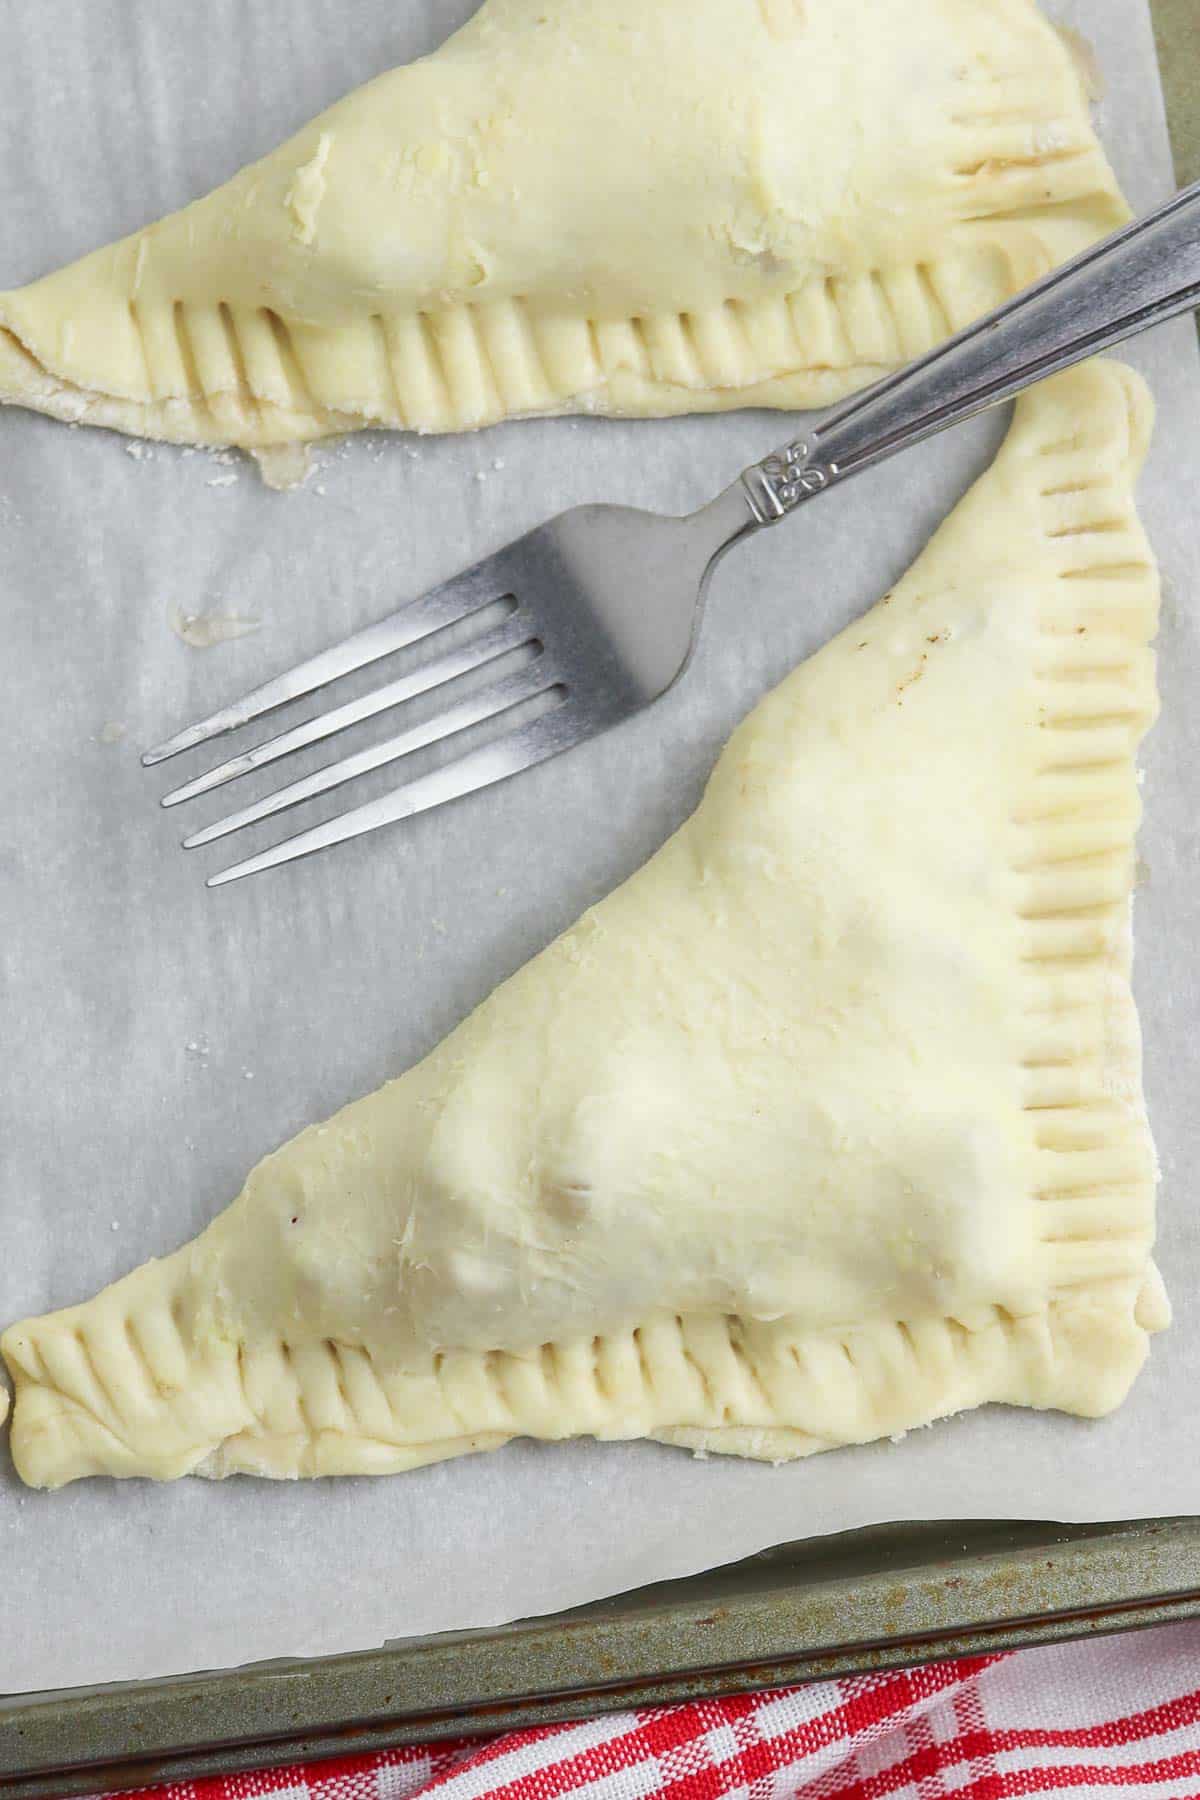 uncooked apple turnover with crimped edges on parchment paper lined baking sheet.